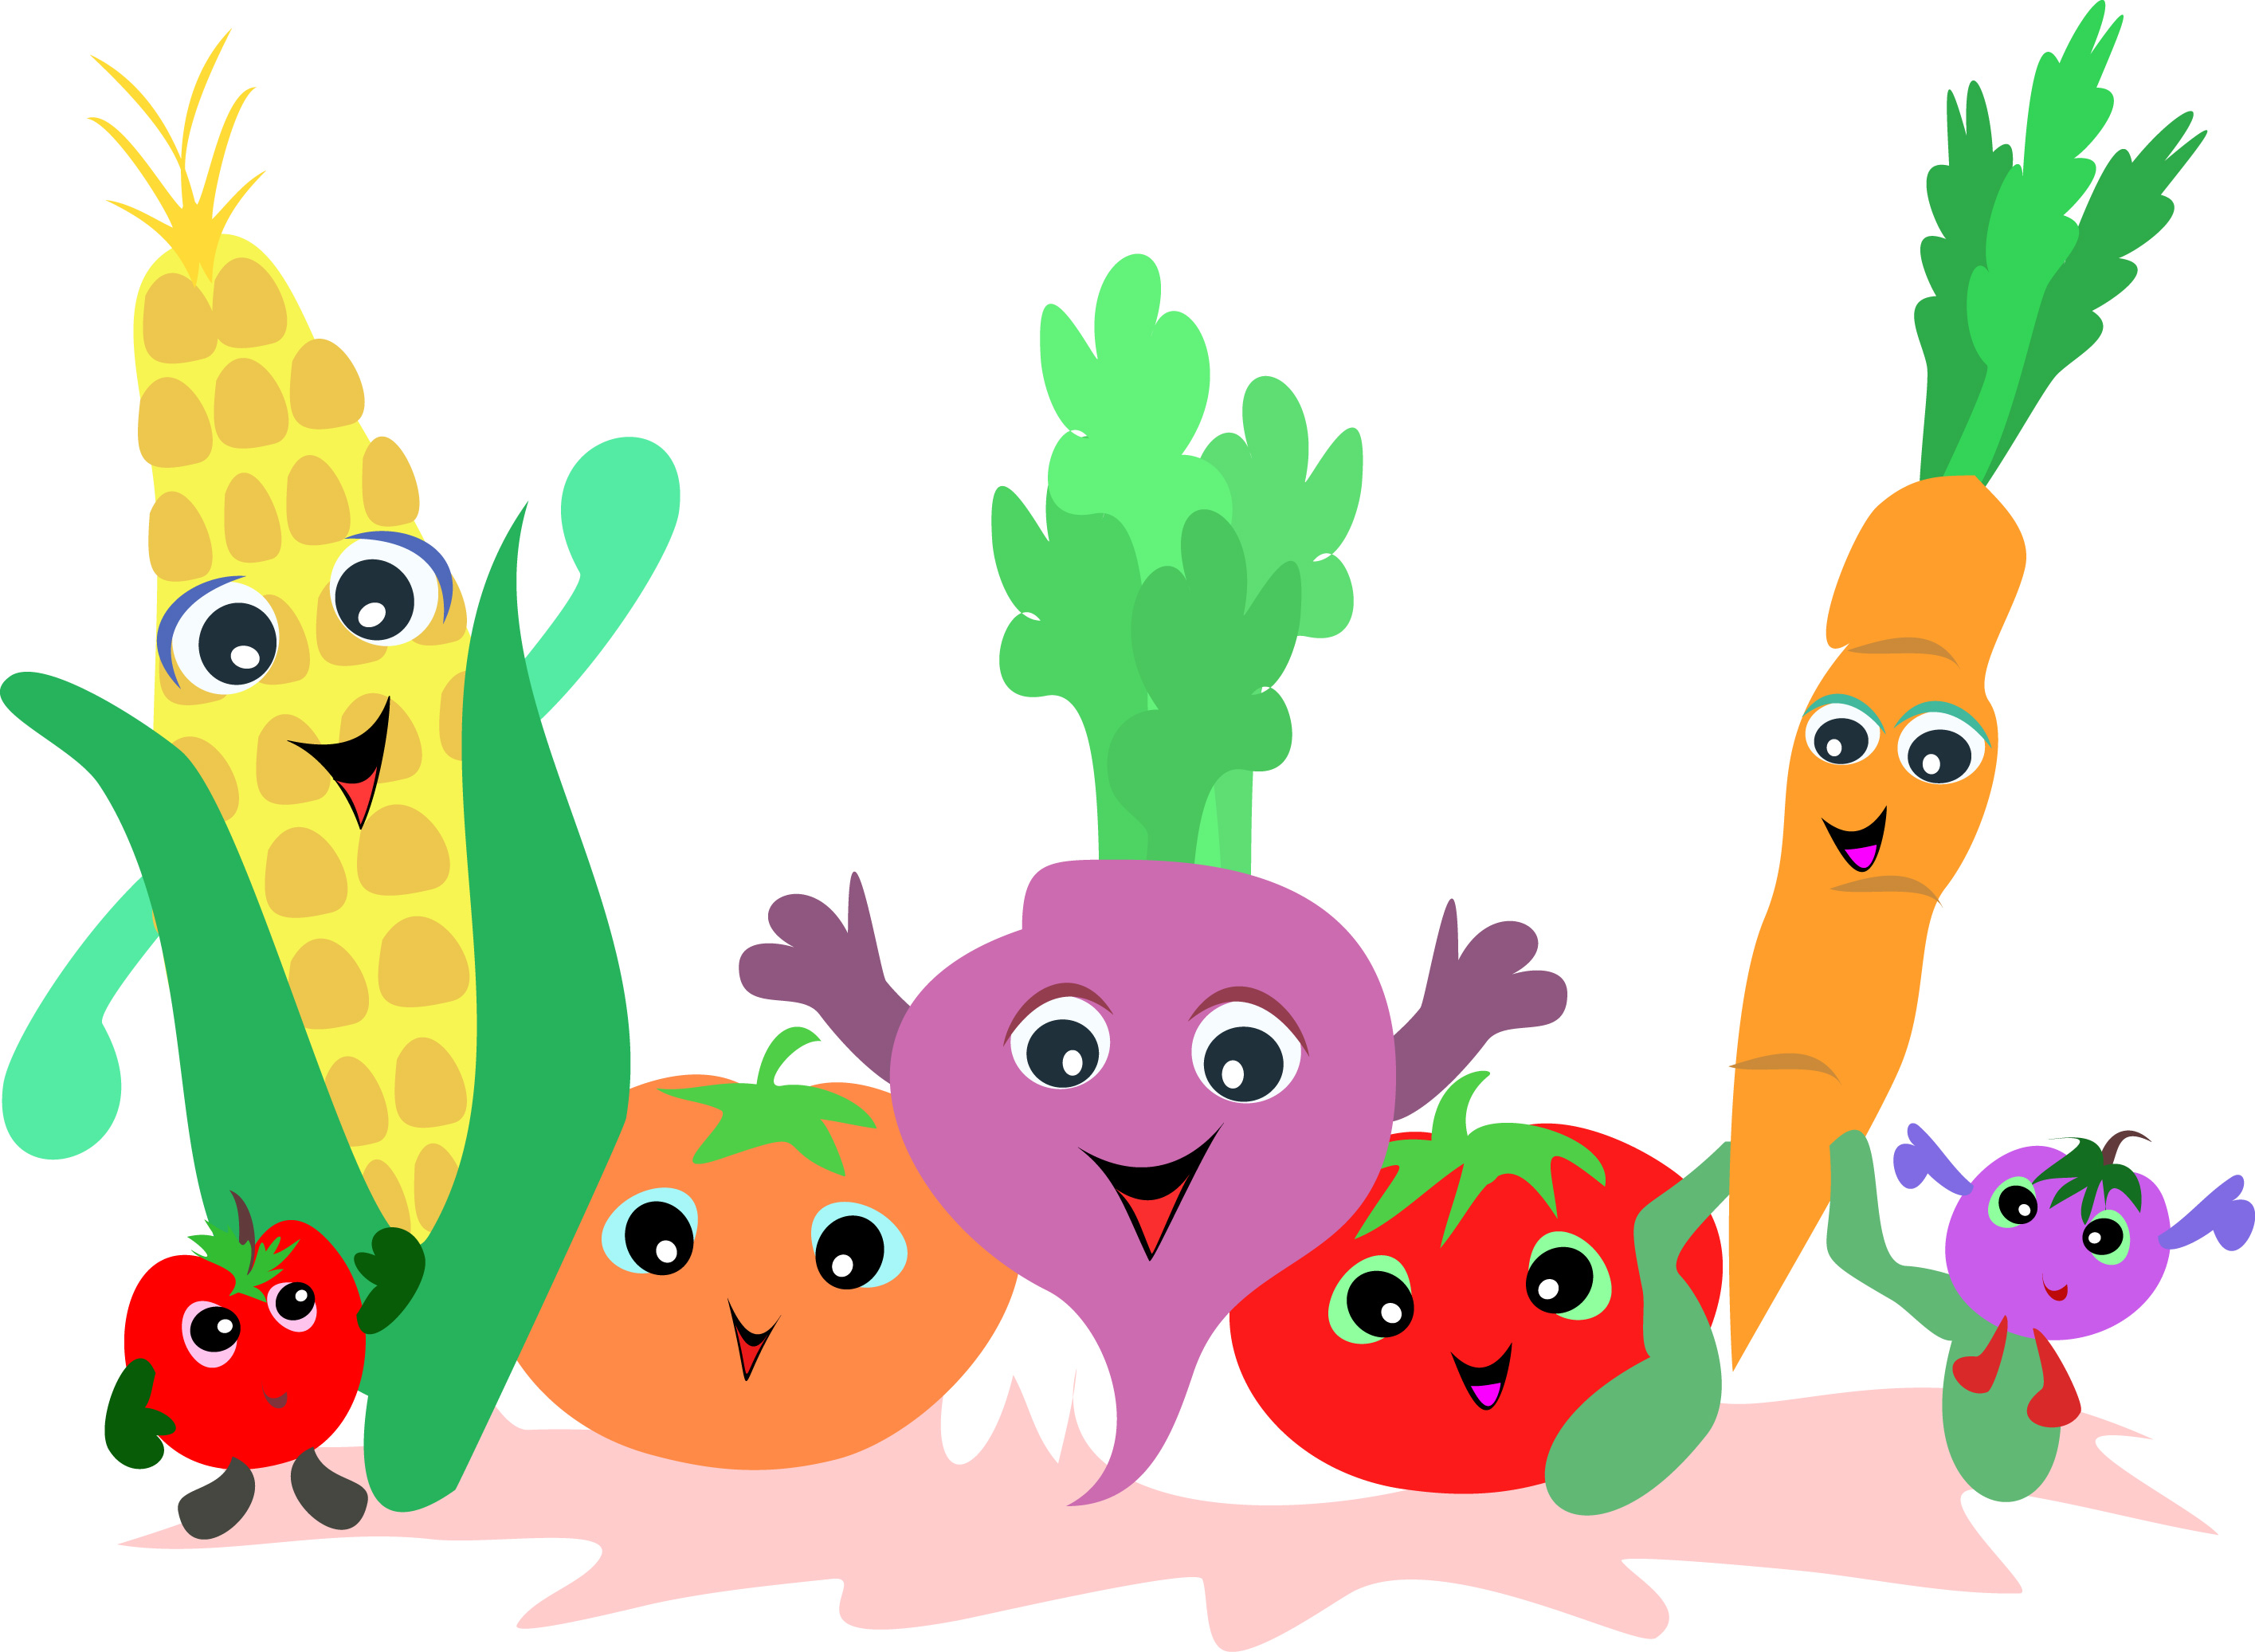 Fruits And Vegetables Border Clipart | Clipart library - Free 